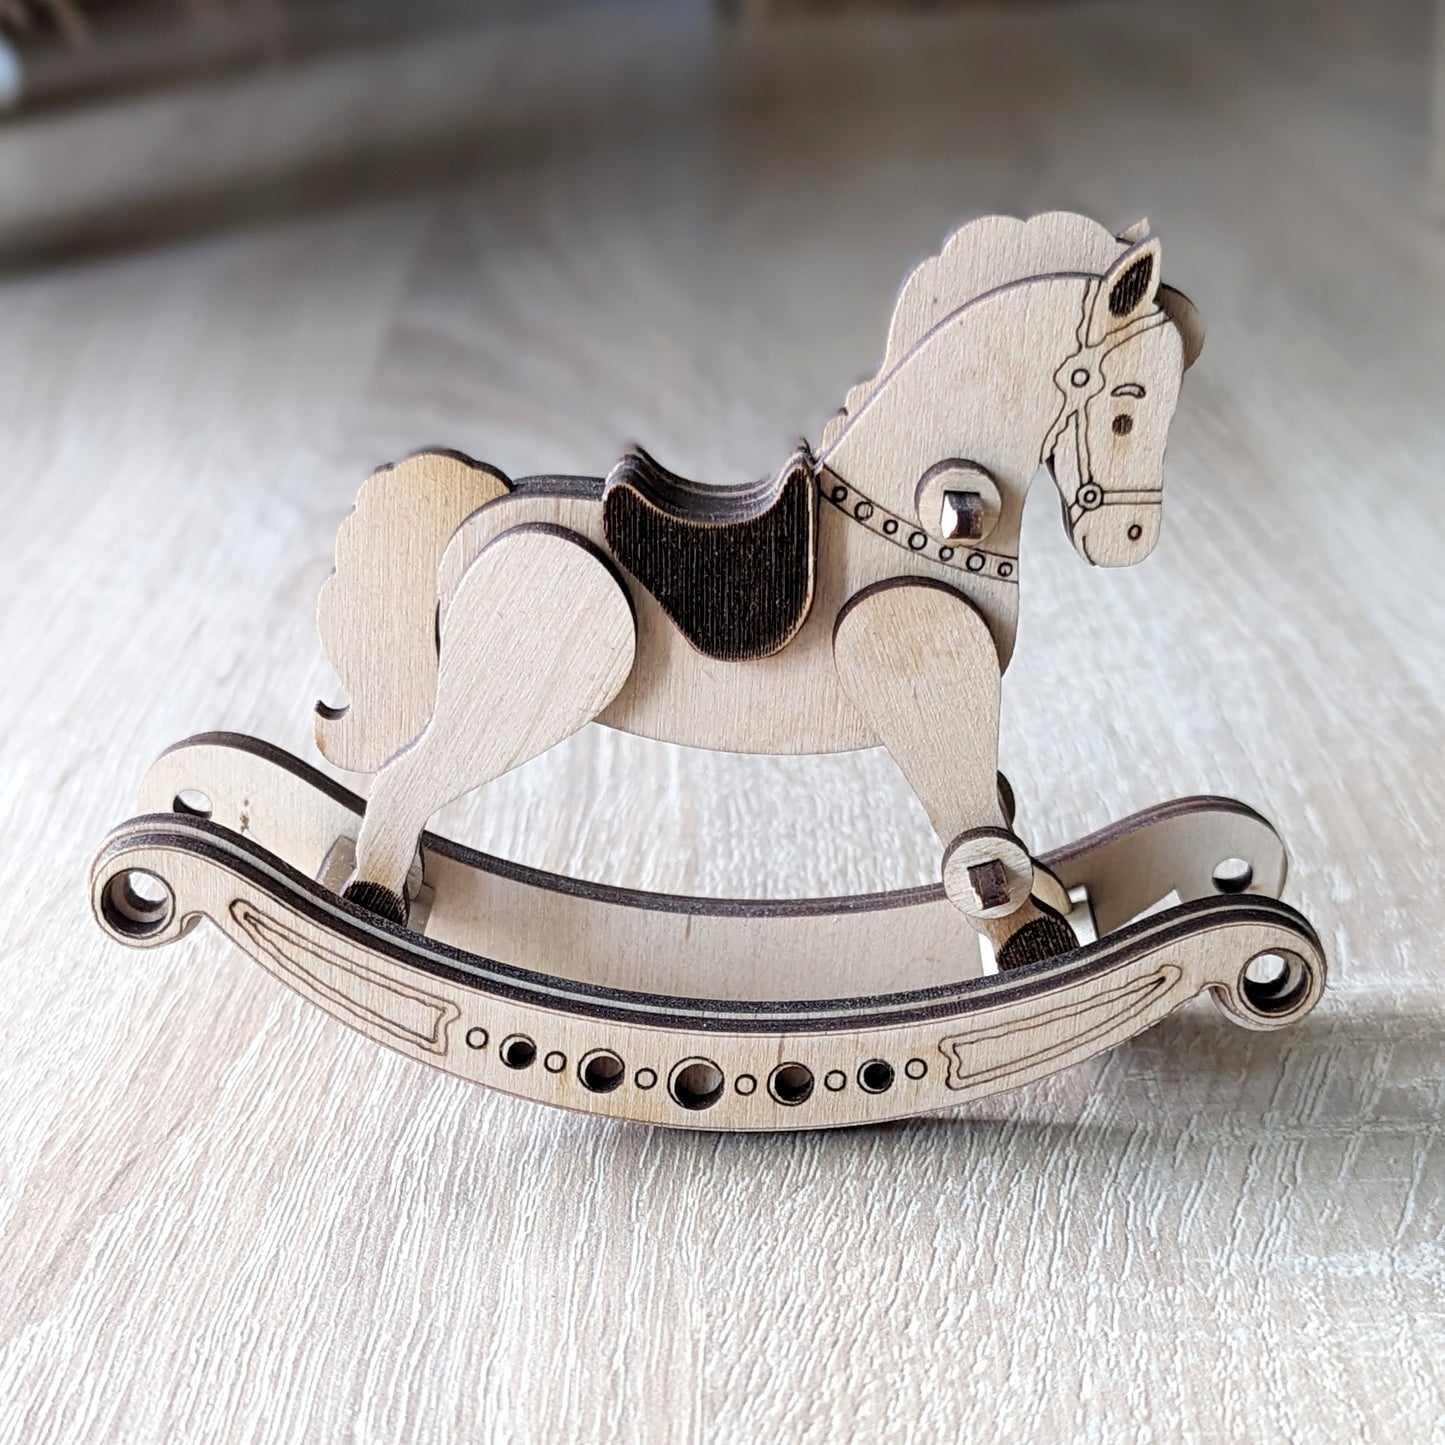 Rocking Horse - A Charming Traditional Toy